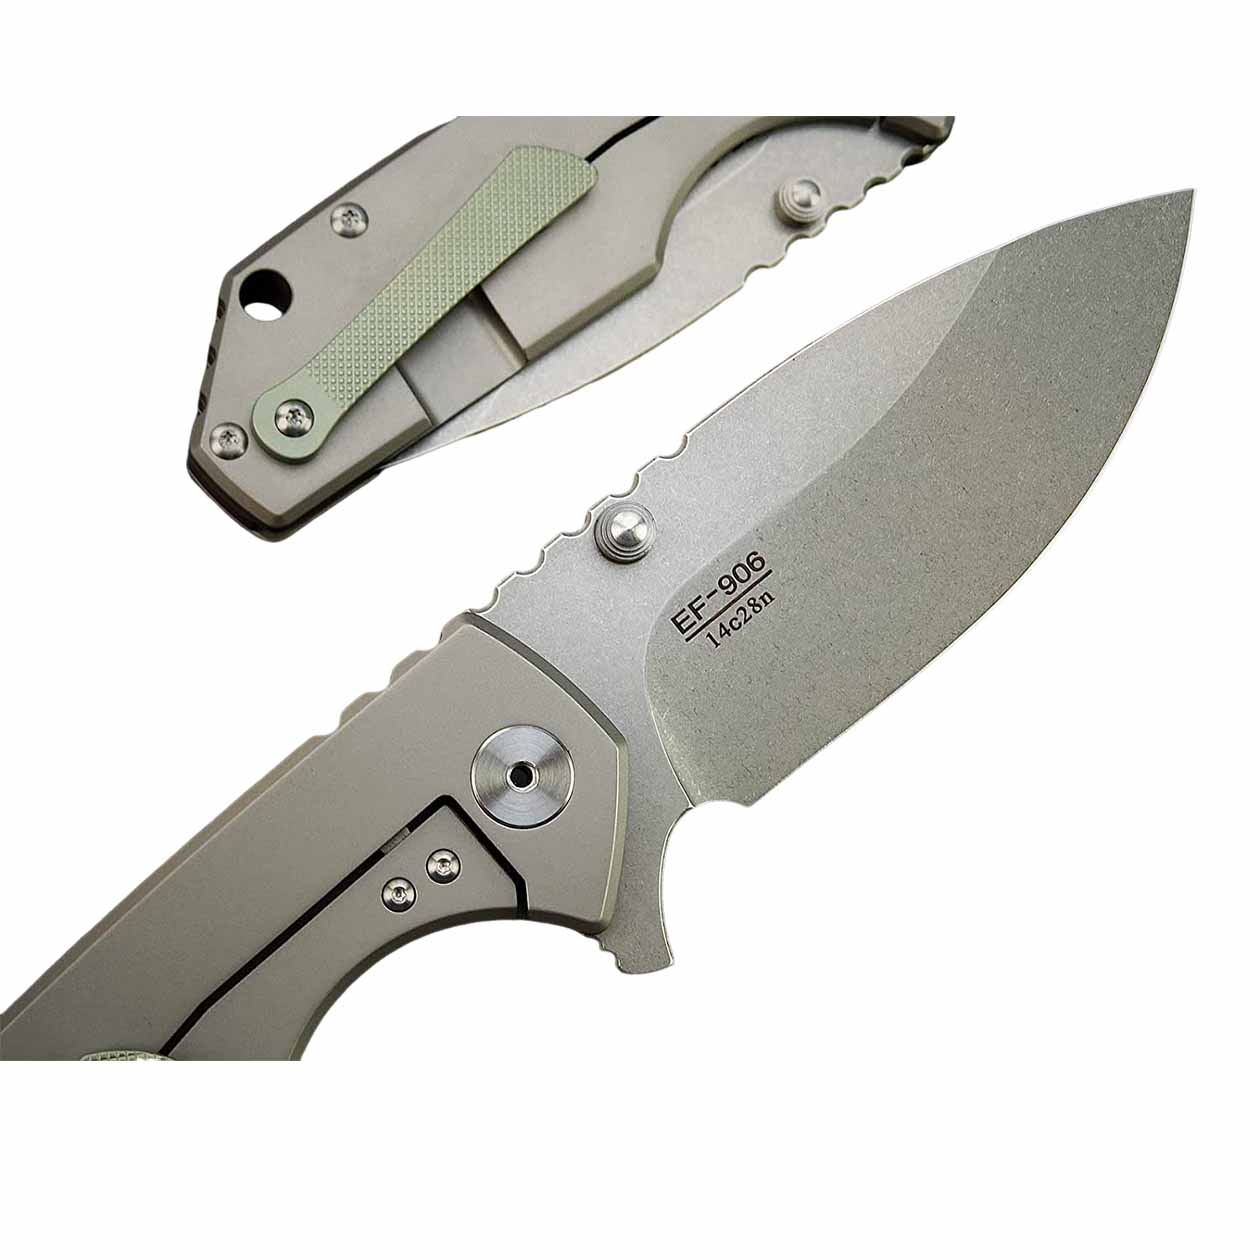 Eafengrow EF906 Folding EDC Tactical knife For Camping Hunting